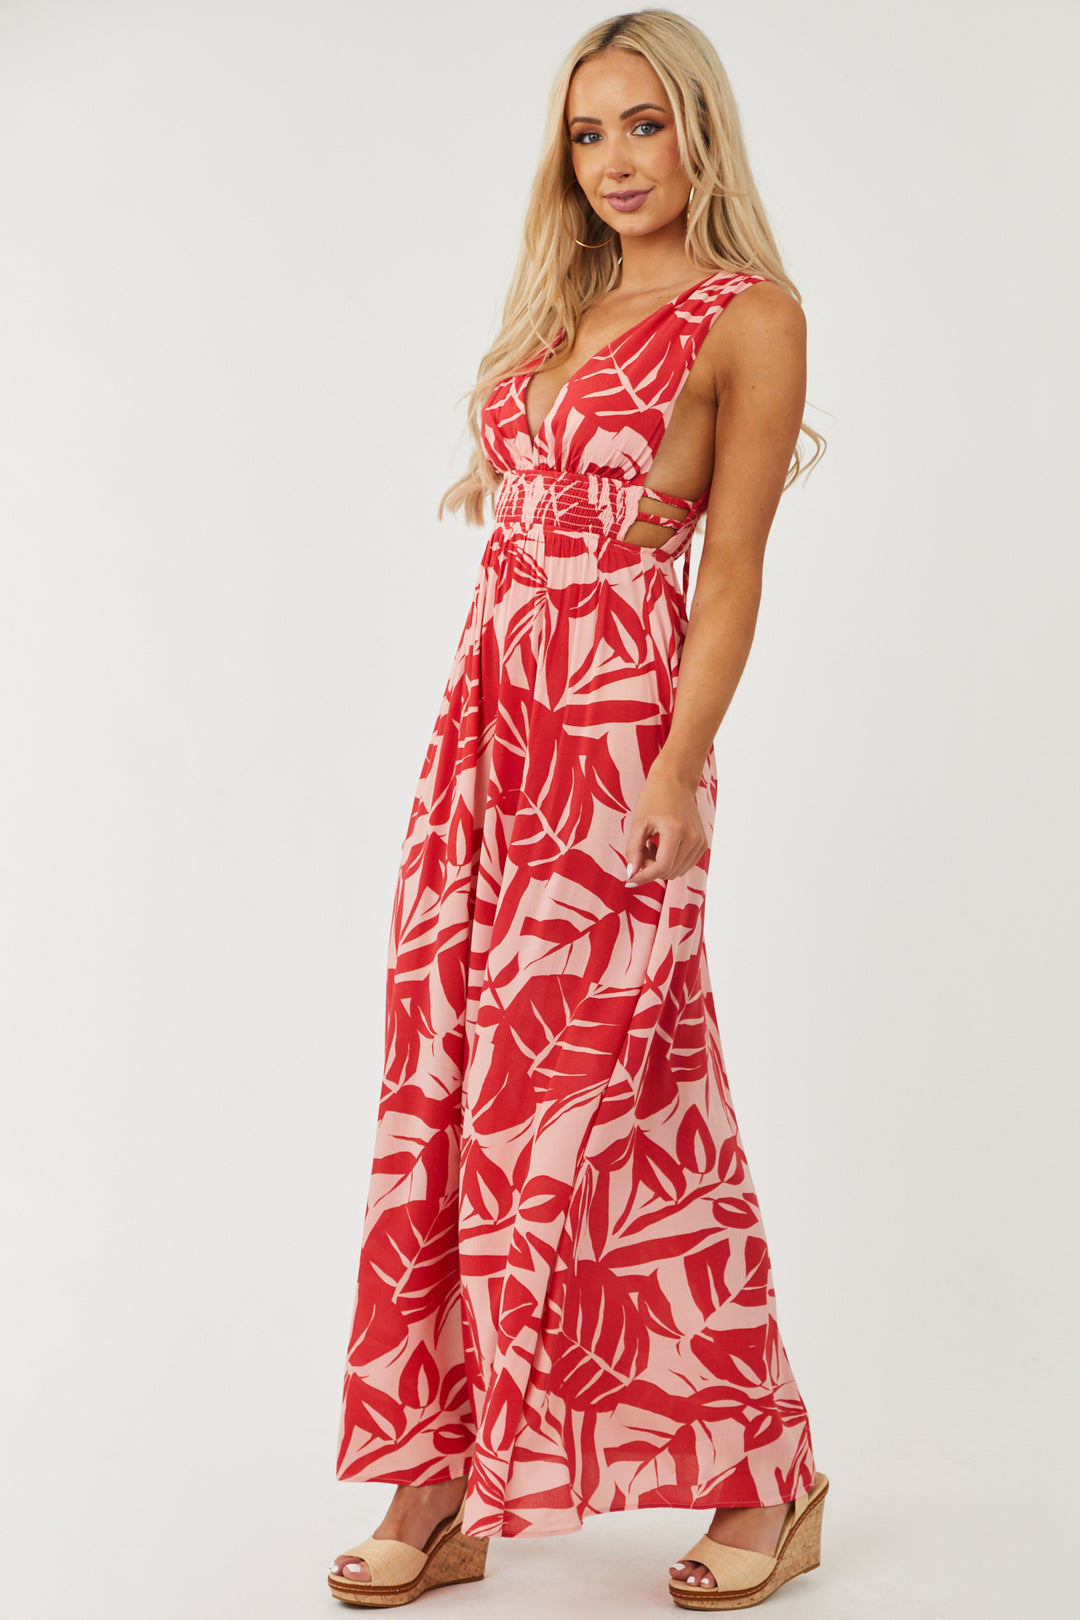 Red and Tea Rose Plunging V Neck Maxi Dress & Lime Lush